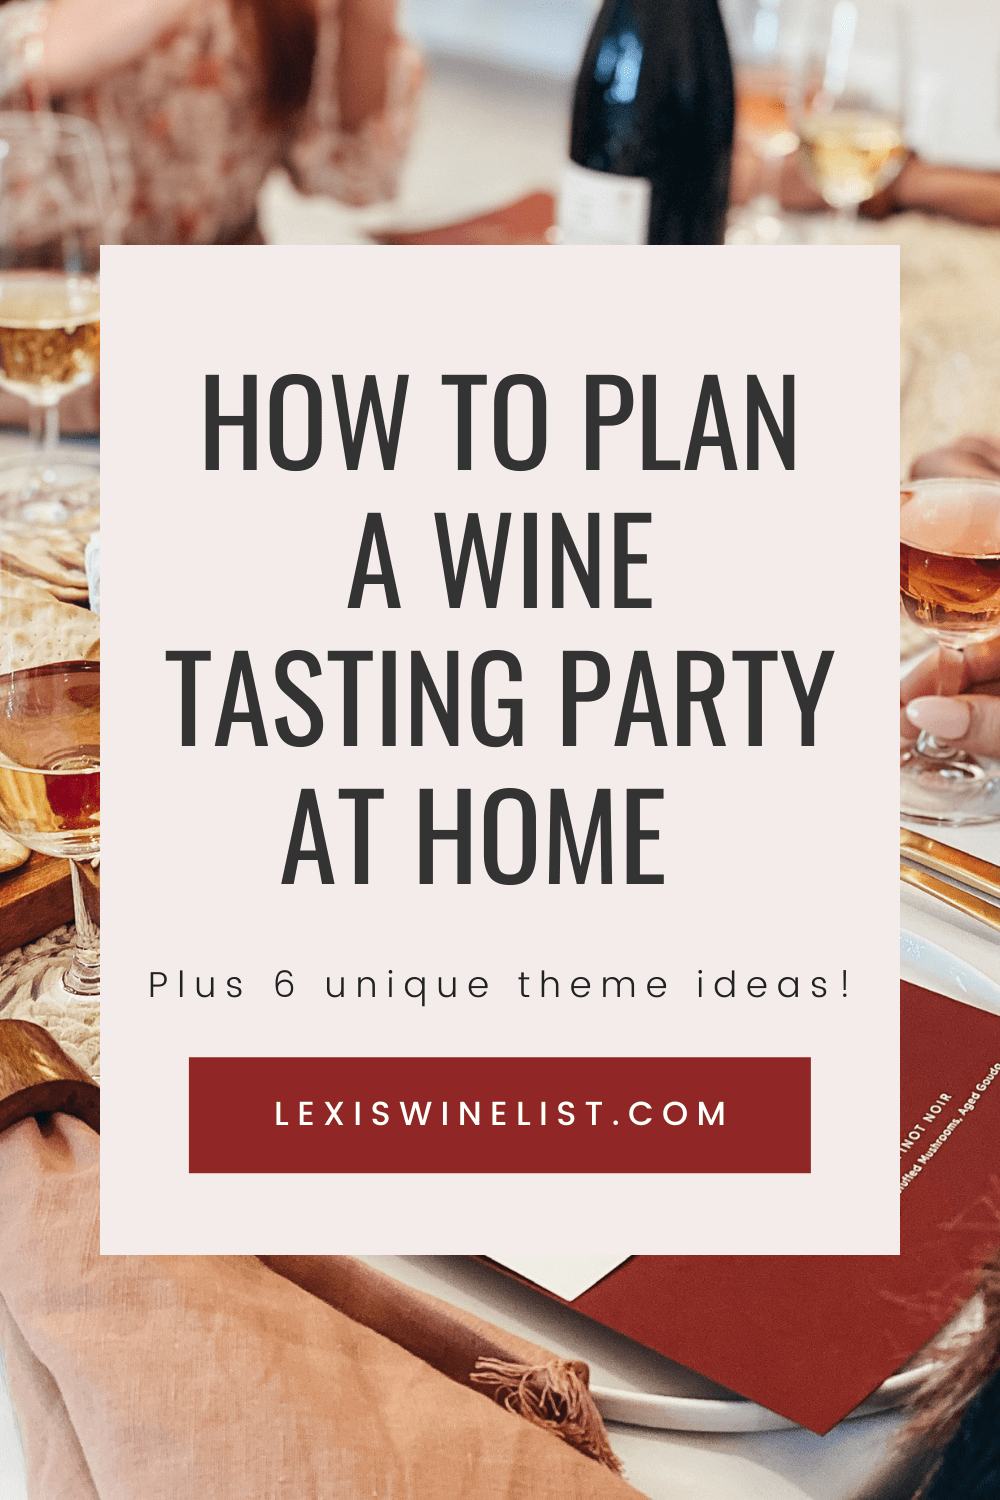 How to Plan a Wine Tasting Party